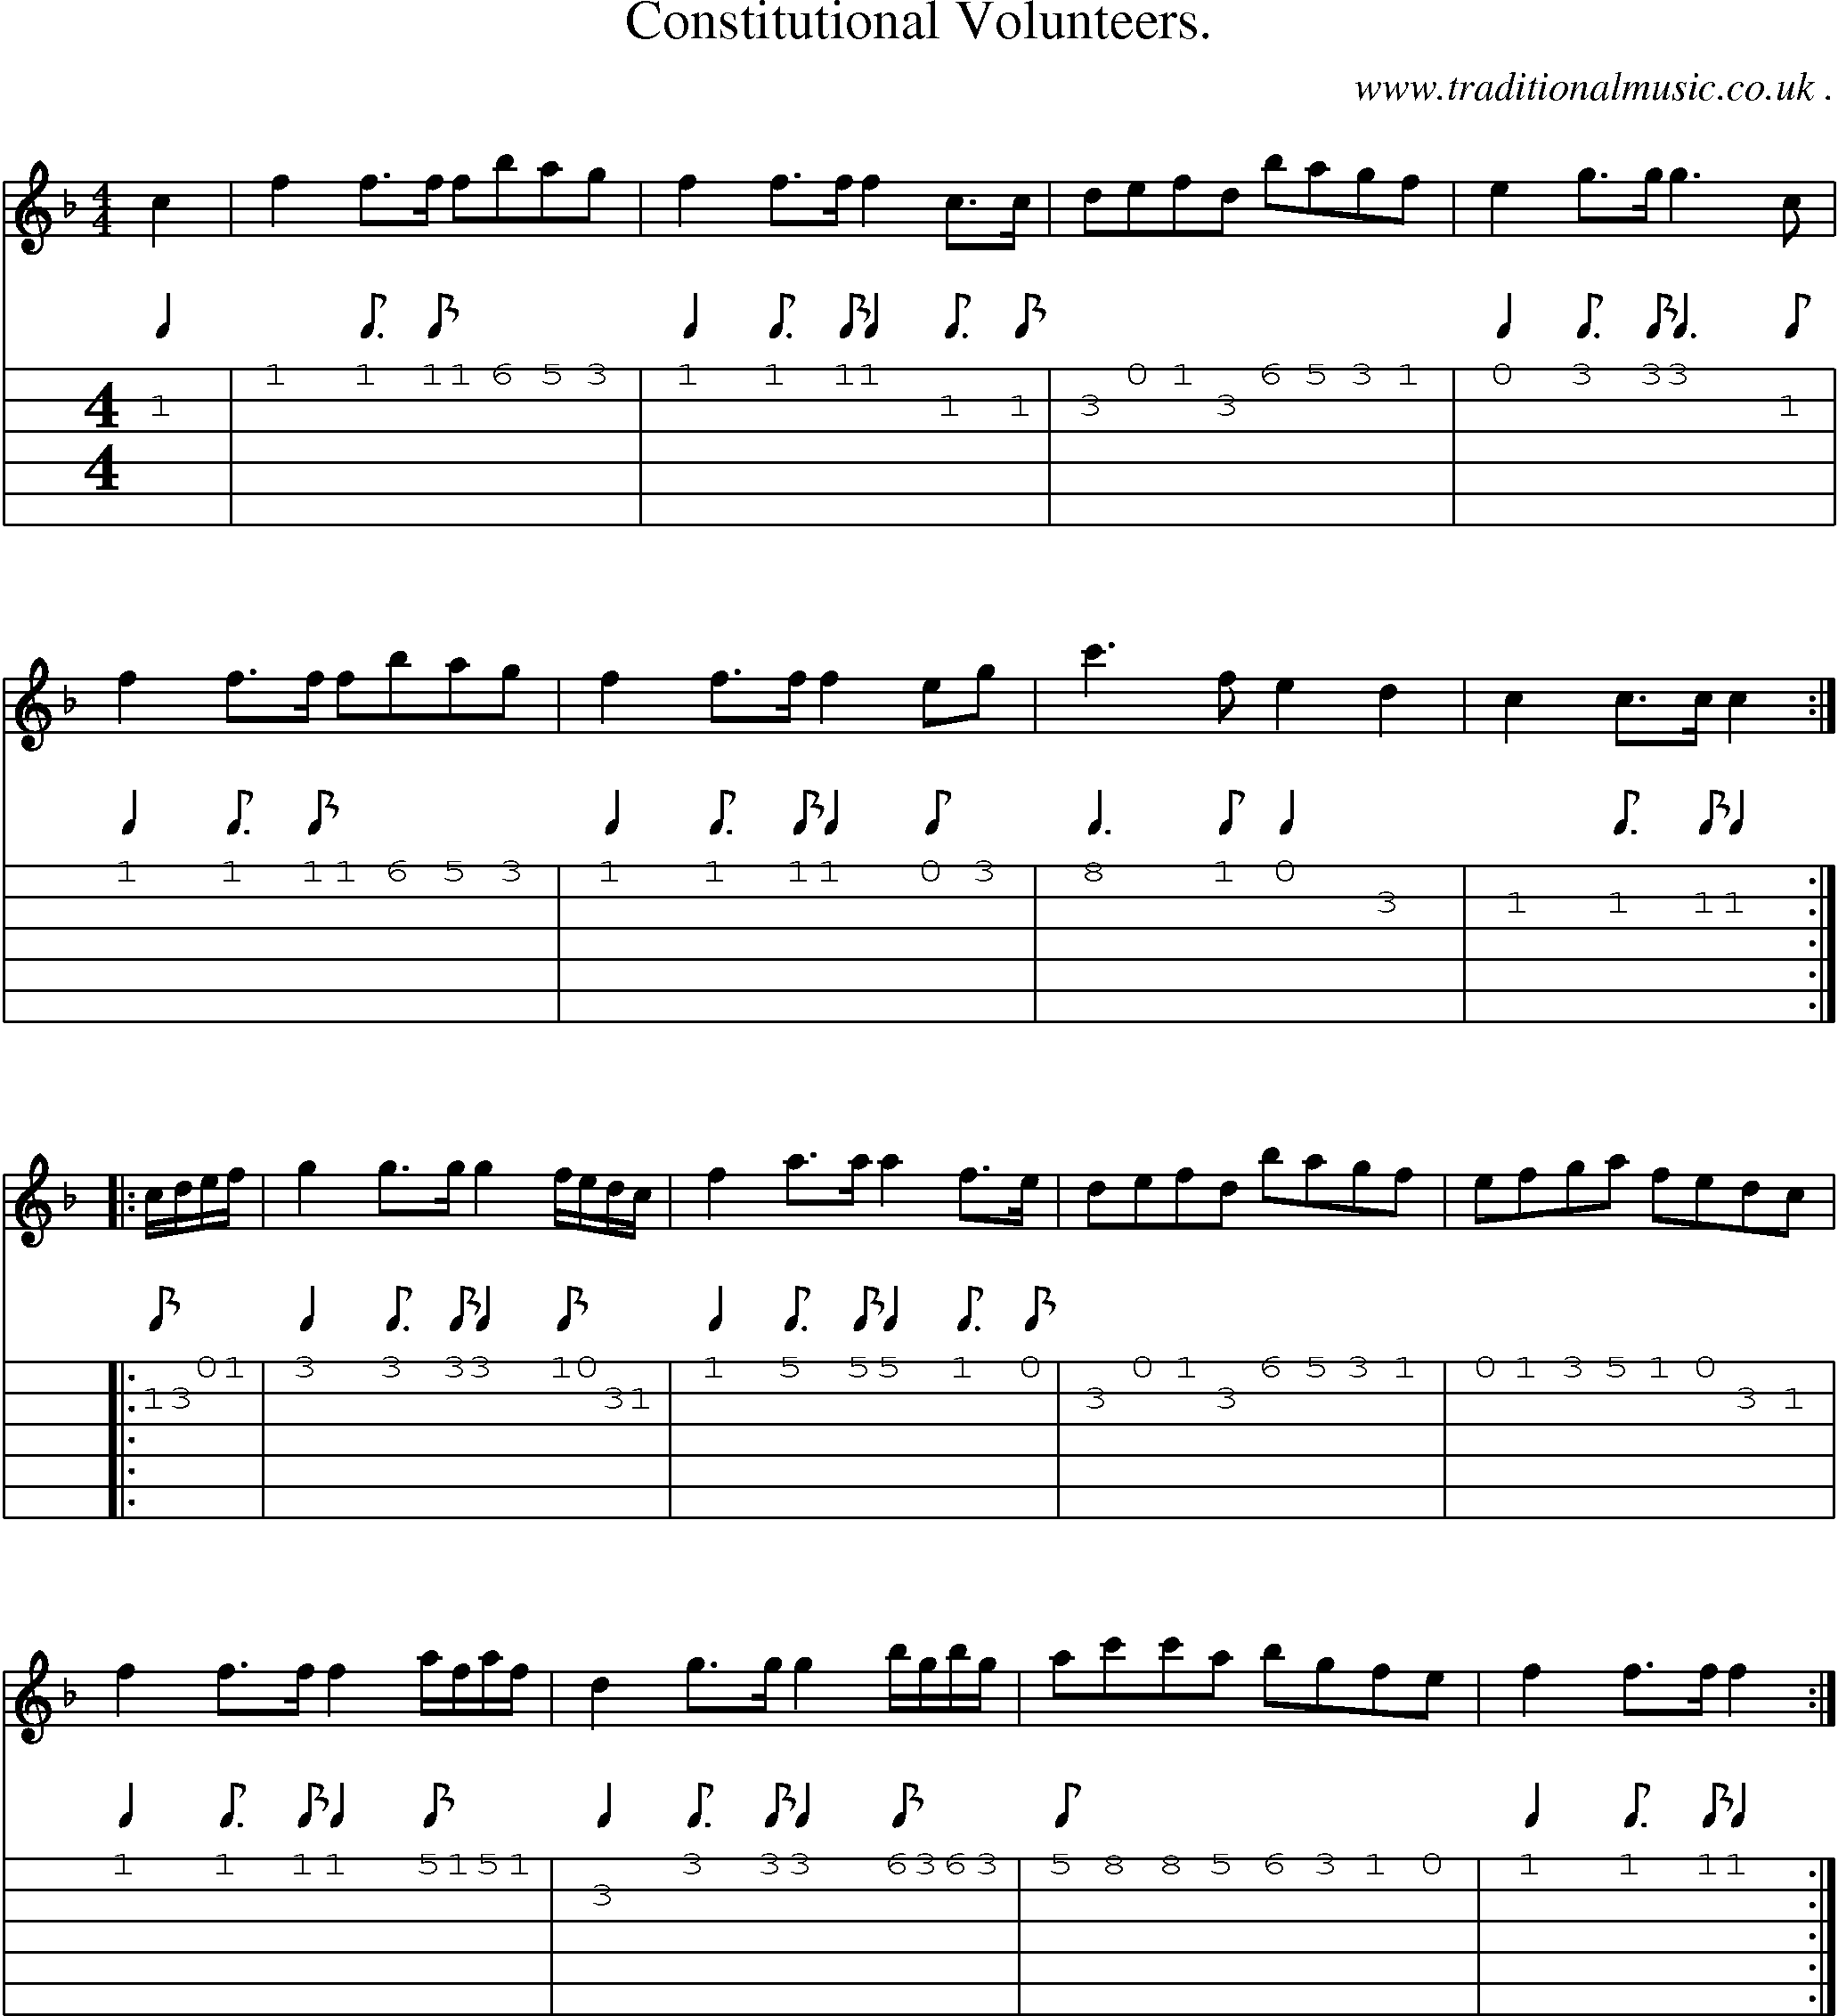 Sheet-Music and Guitar Tabs for Constitutional Volunteers